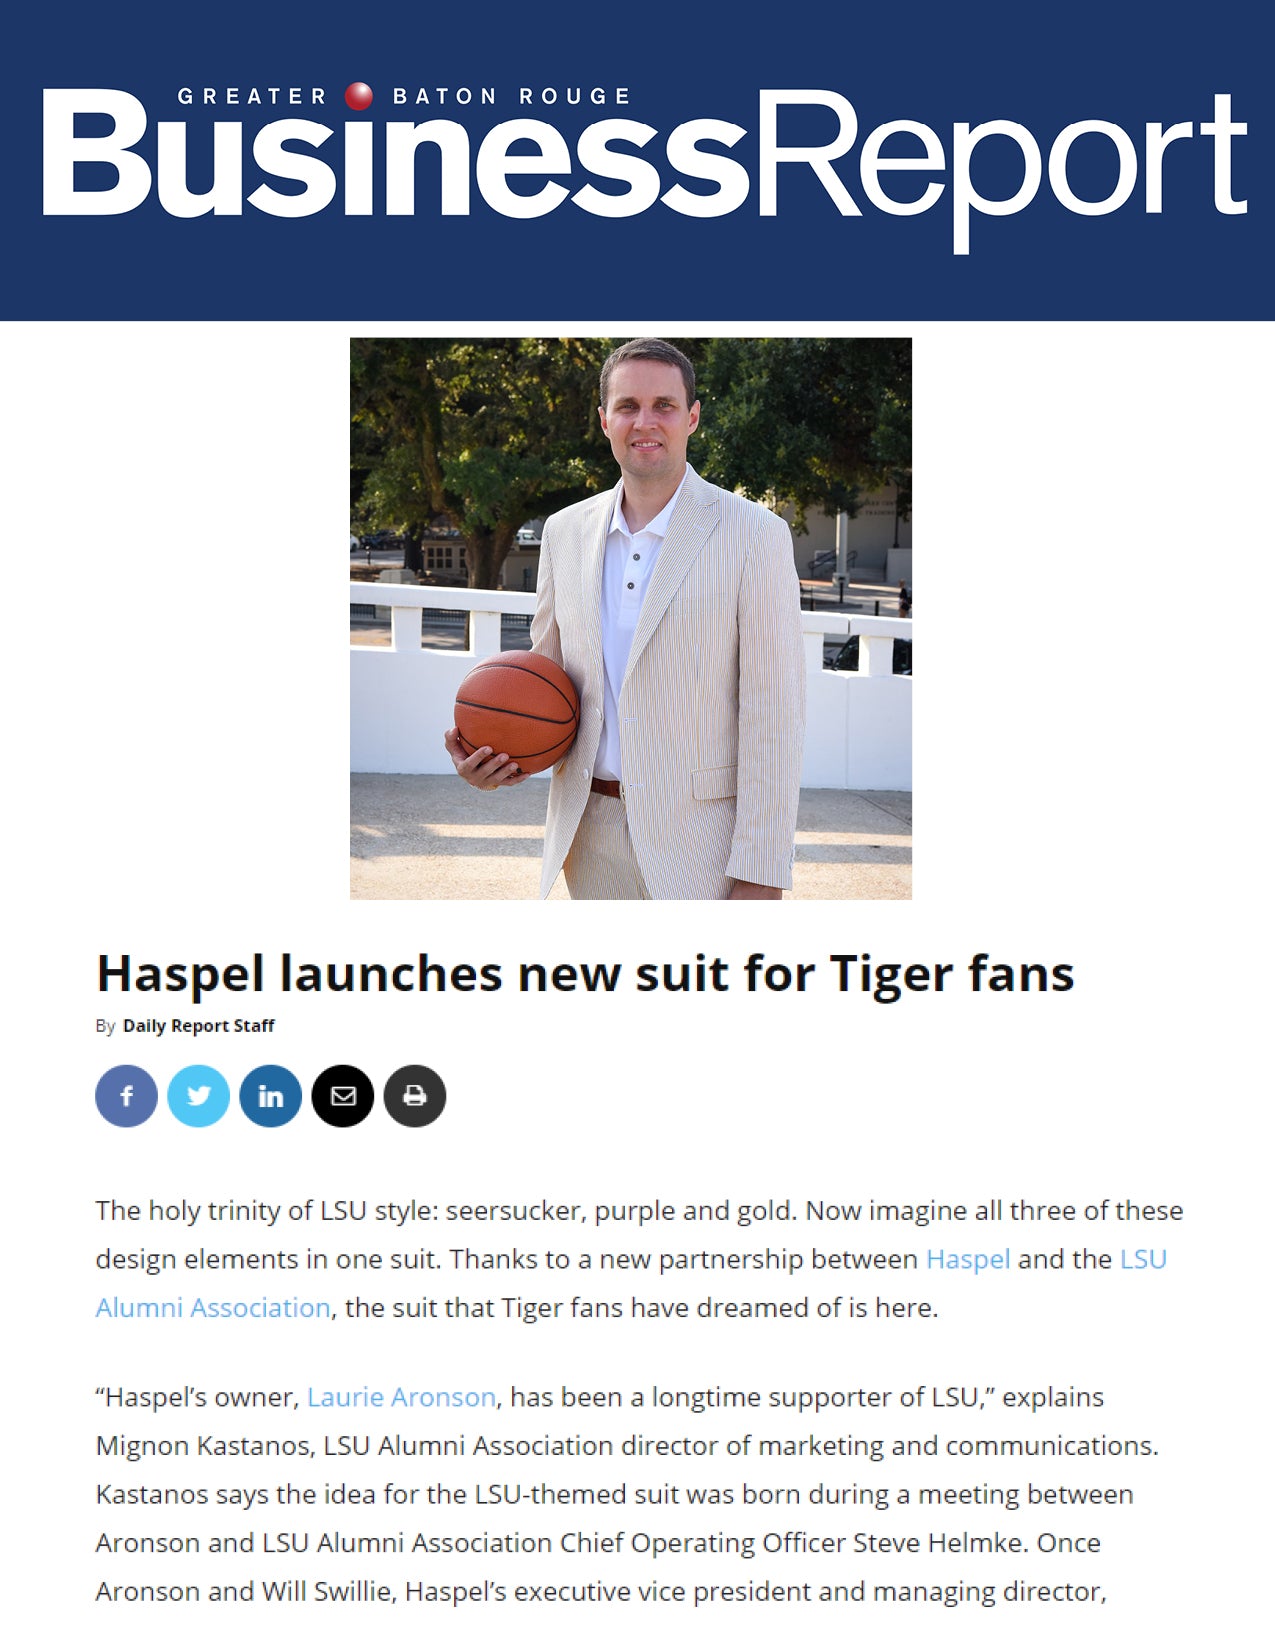 Haspel launches new suit for Tiger fans | BR Business Report | SEPTEMBER 2019